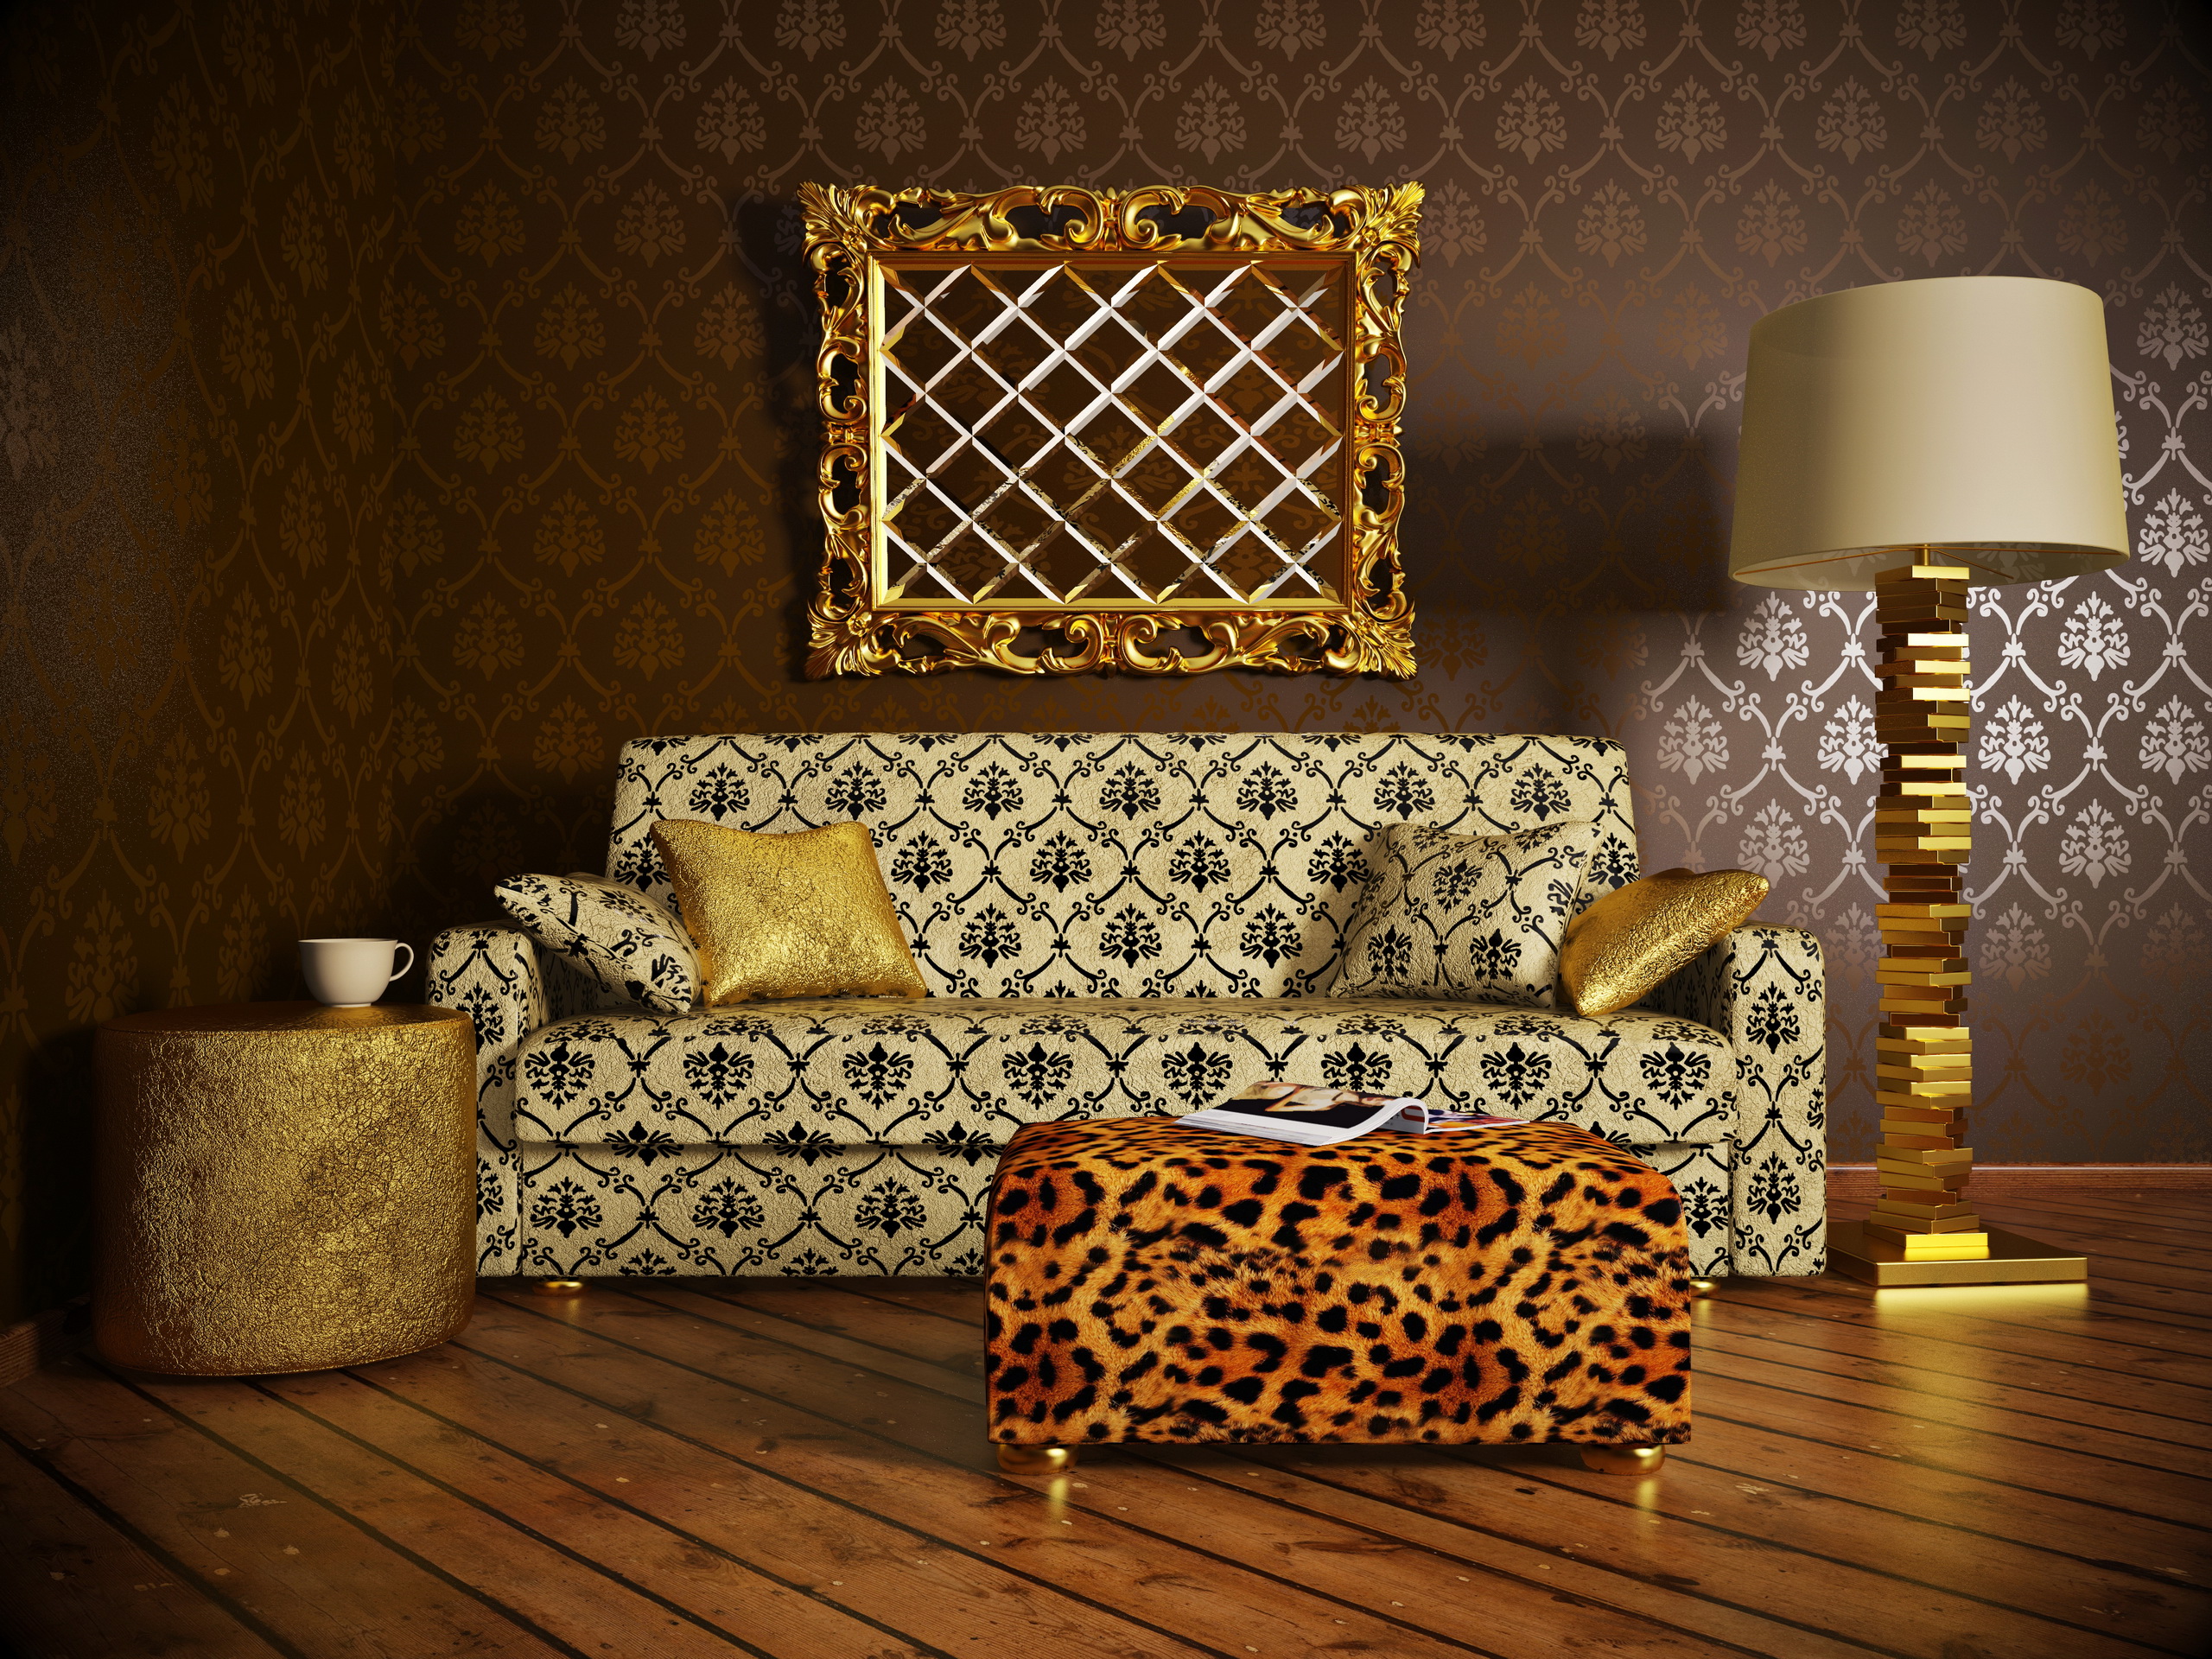 Furniture Wallpapers Pictures Images HD Wallpapers Download Free Images Wallpaper [wallpaper981.blogspot.com]